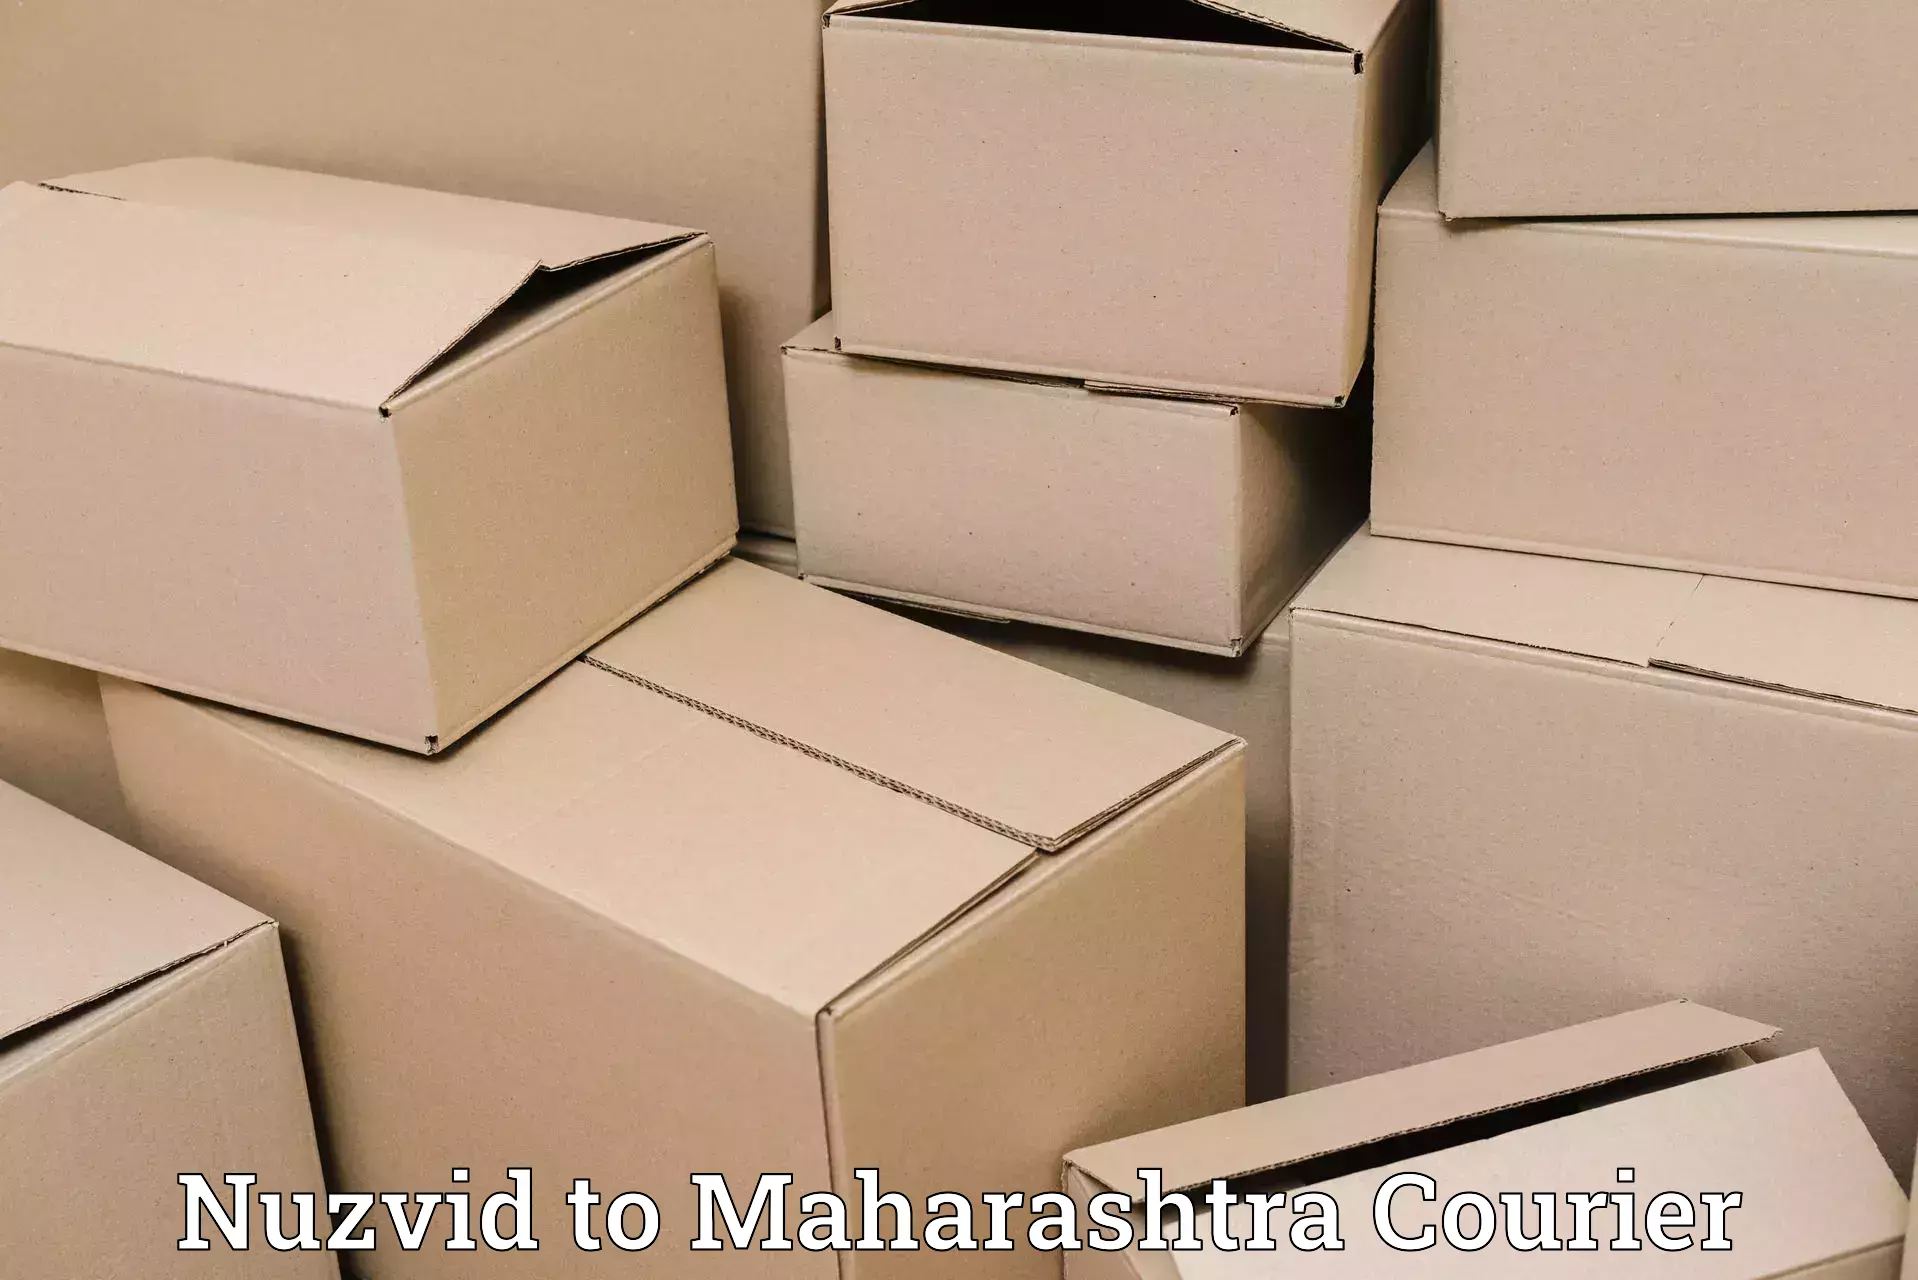 Package delivery network Nuzvid to Mumbai Port